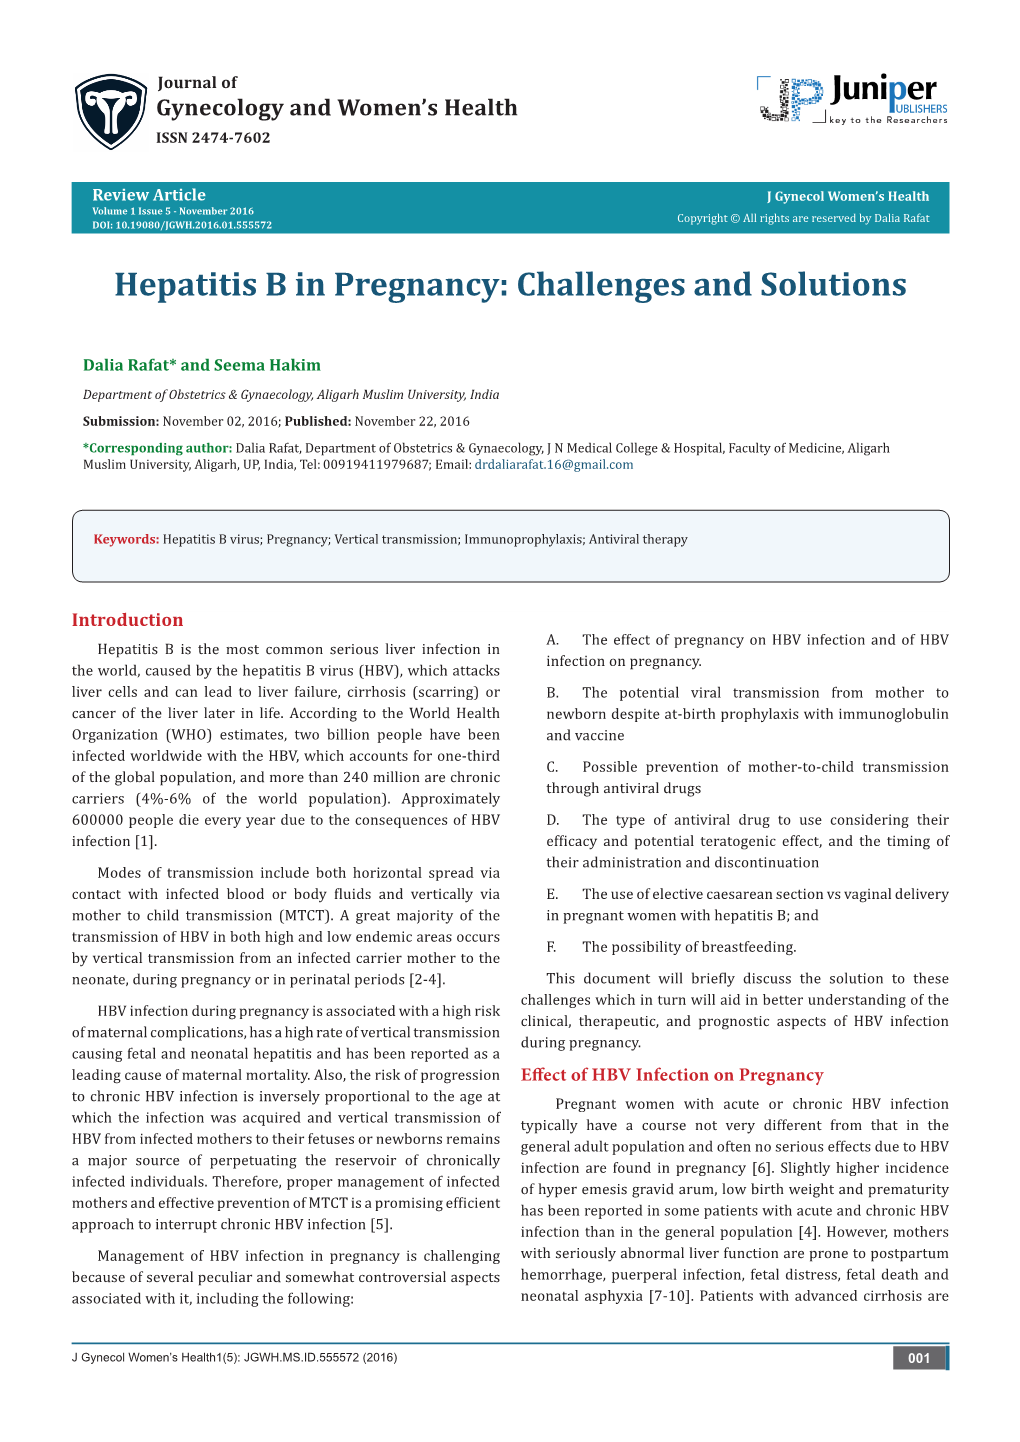 Hepatitis B in Pregnancy: Challenges and Solutions